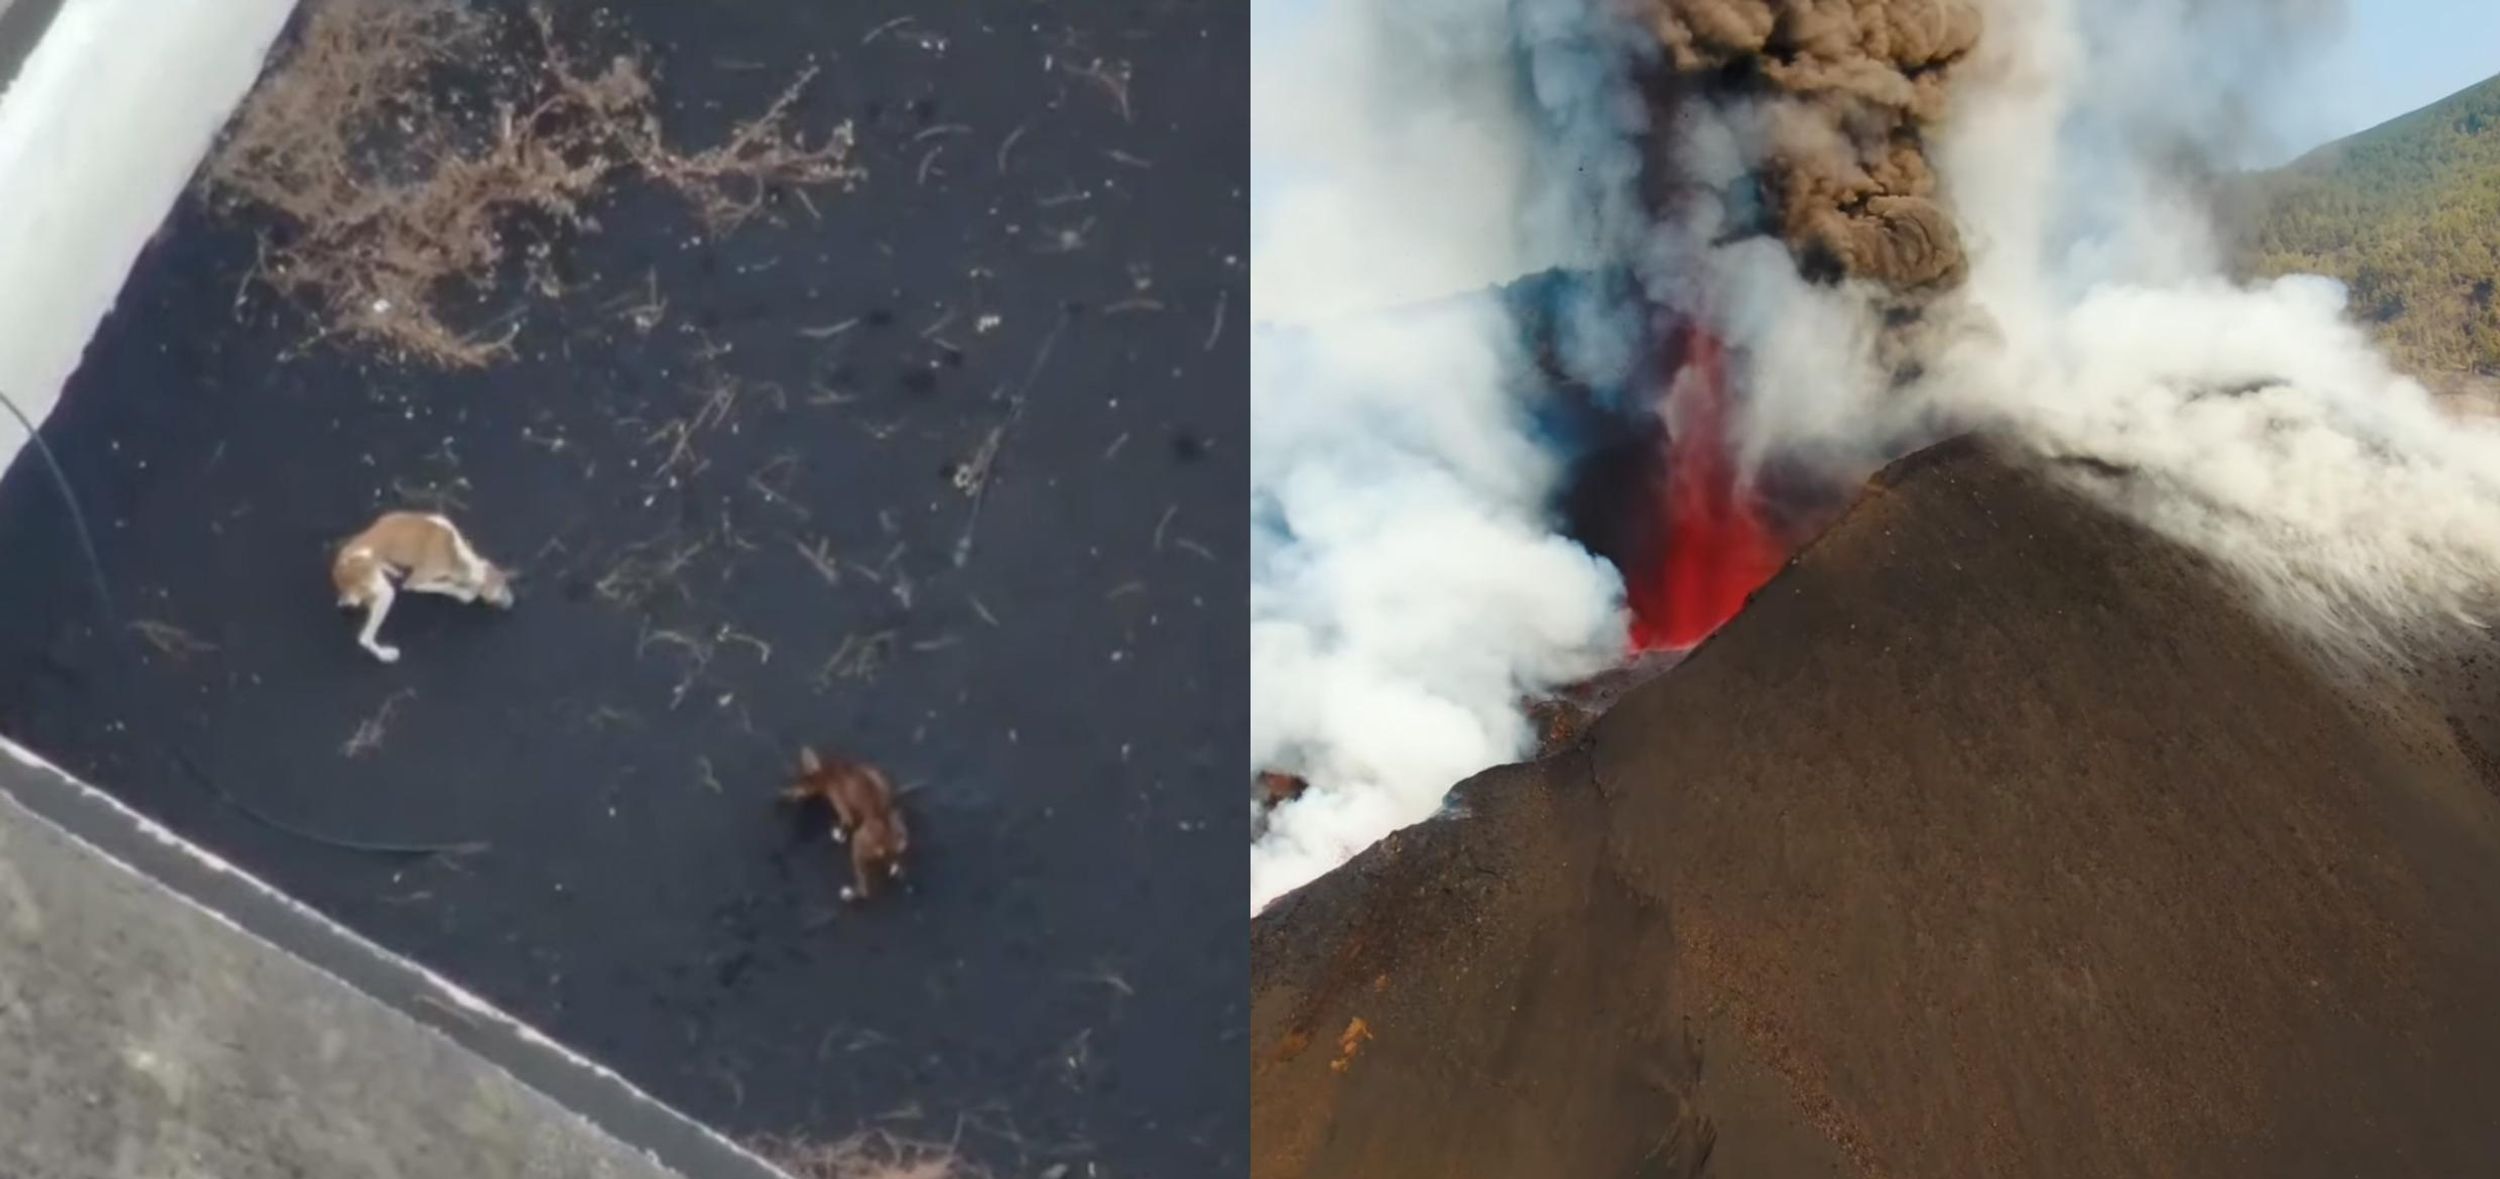 Left, screenshot from a drone video shows an aerial view of a dark brown and light brown dog in an enclosure. Right, red lava , white smoke and brown ash spew out of a hole.